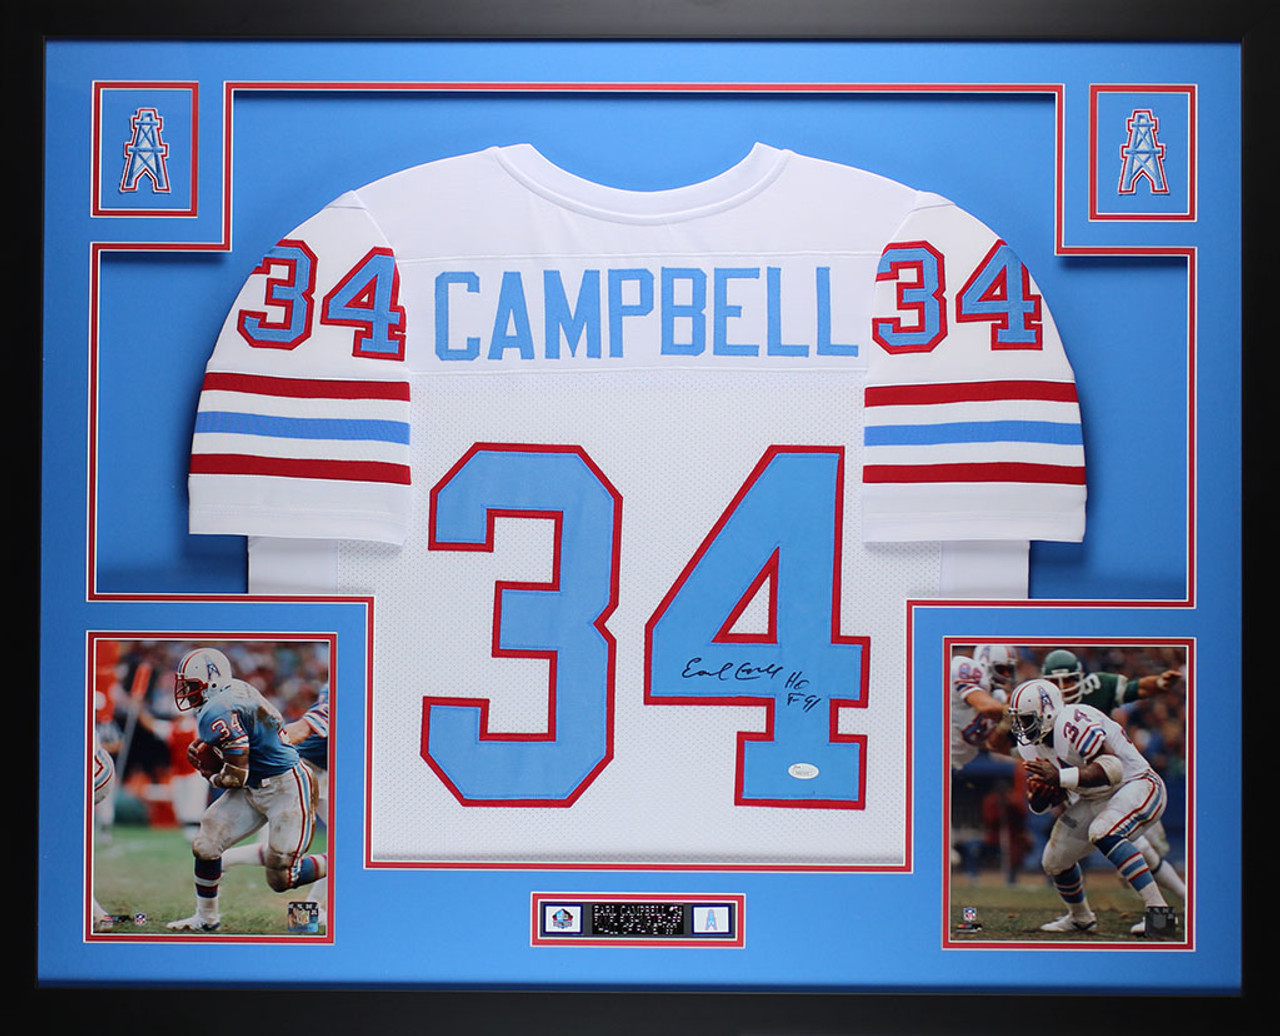 Stan Campbell nfl jersey